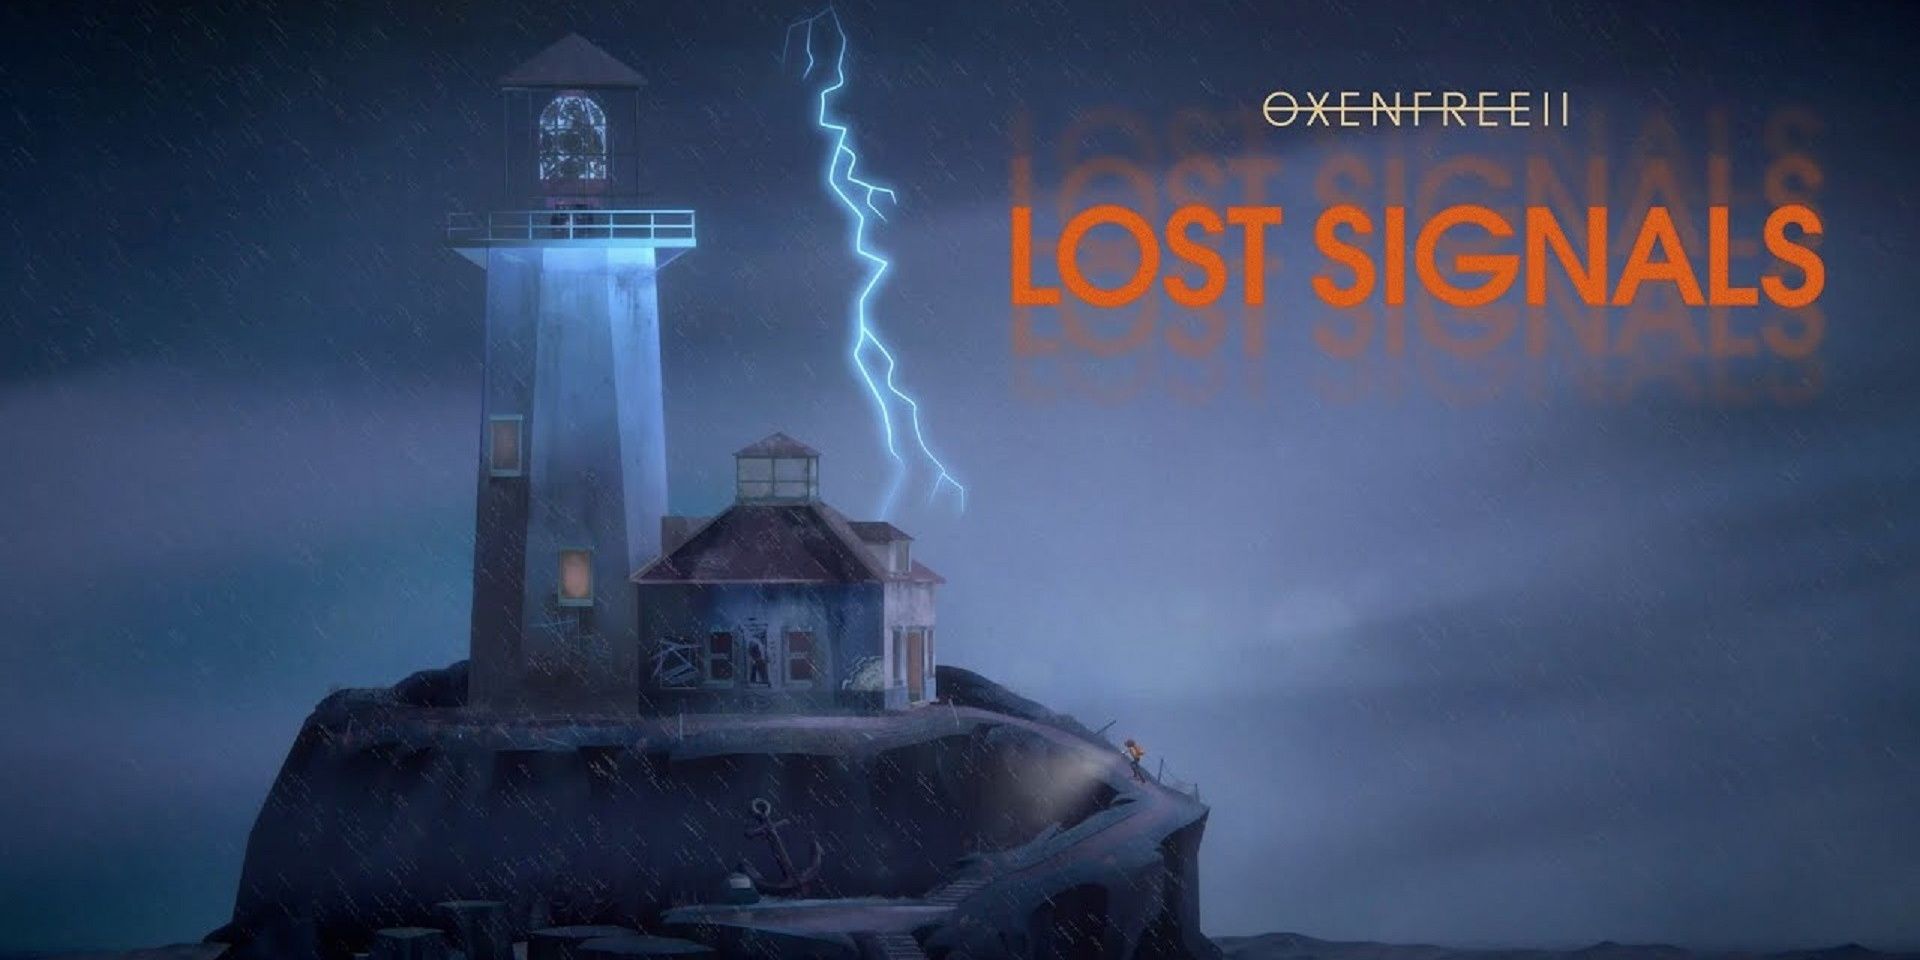 The poster for Oxenfree 2 Lost Signals featuring a lighthouse on an island with lightning in the sky.